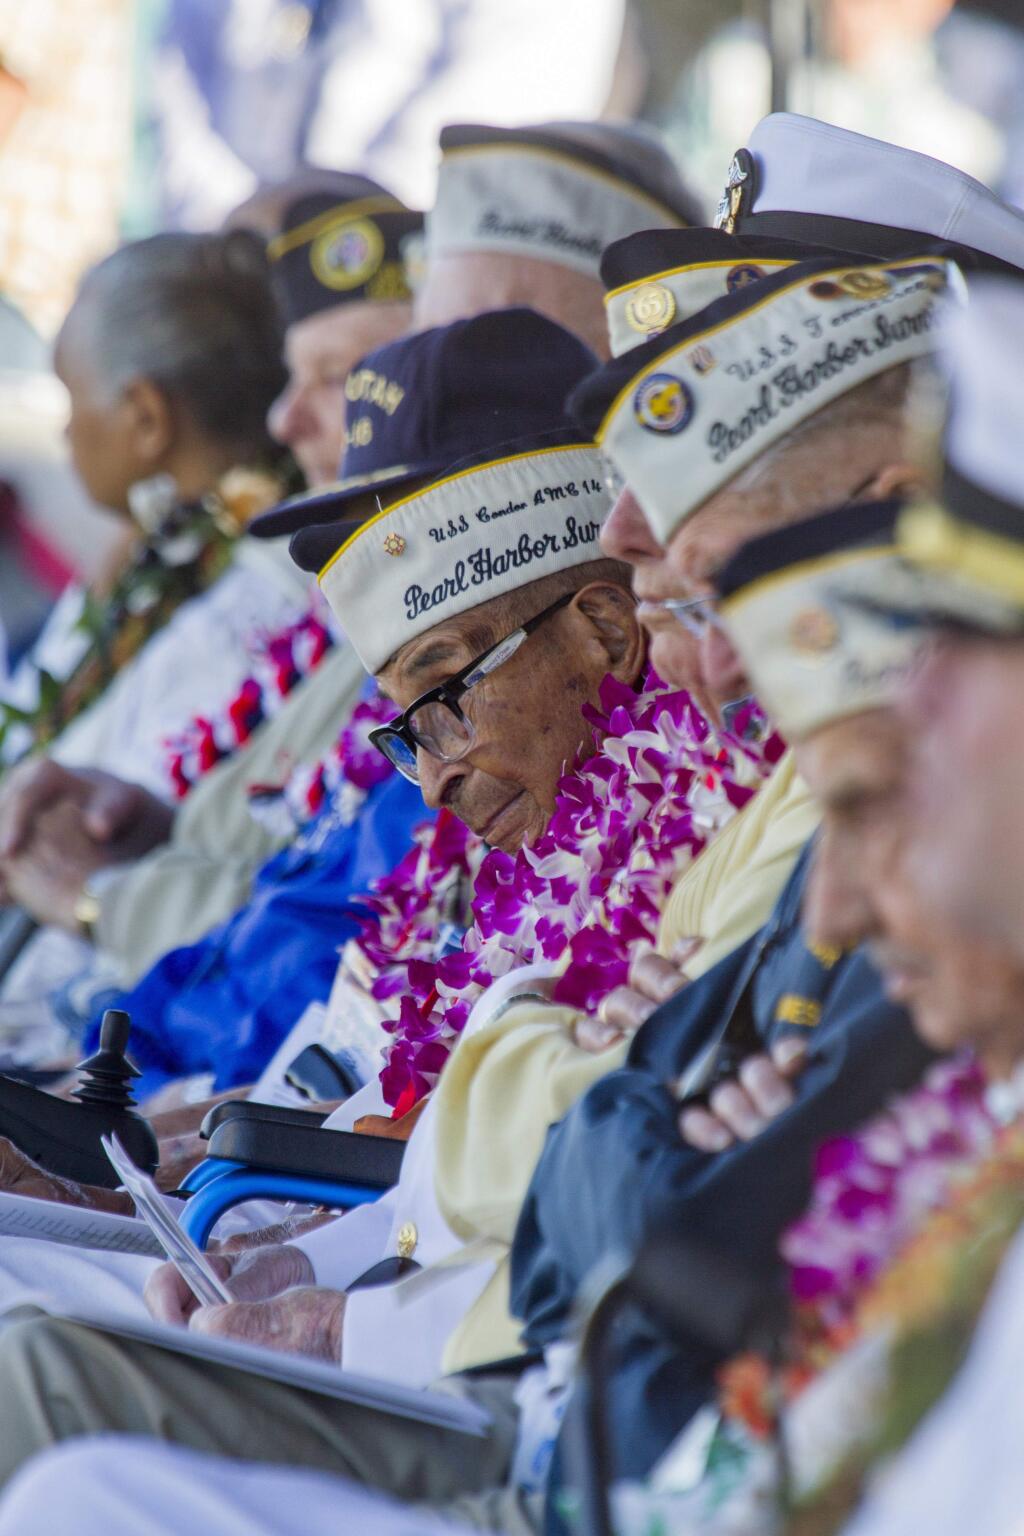 Raymond Chavez, center, the oldest living Pearl Harbor survivor is shown at 76th Anniversary Commemoration, of the Pearl Harbor attack, Thursday, Dec. 7, 2017, in Honolulu, Hawaii. Survivors gathered Thursday at the site of the Japanese attack on Pearl Harbor to remember fellow servicemen killed in the early morning raid 76 years ago, paying homage to the thousands who died with a solemn ceremony marking the surprise bombing raid that plunged the U.S. into World War II. (Dennis Oda /The Star-Advertiser via AP, Pool)